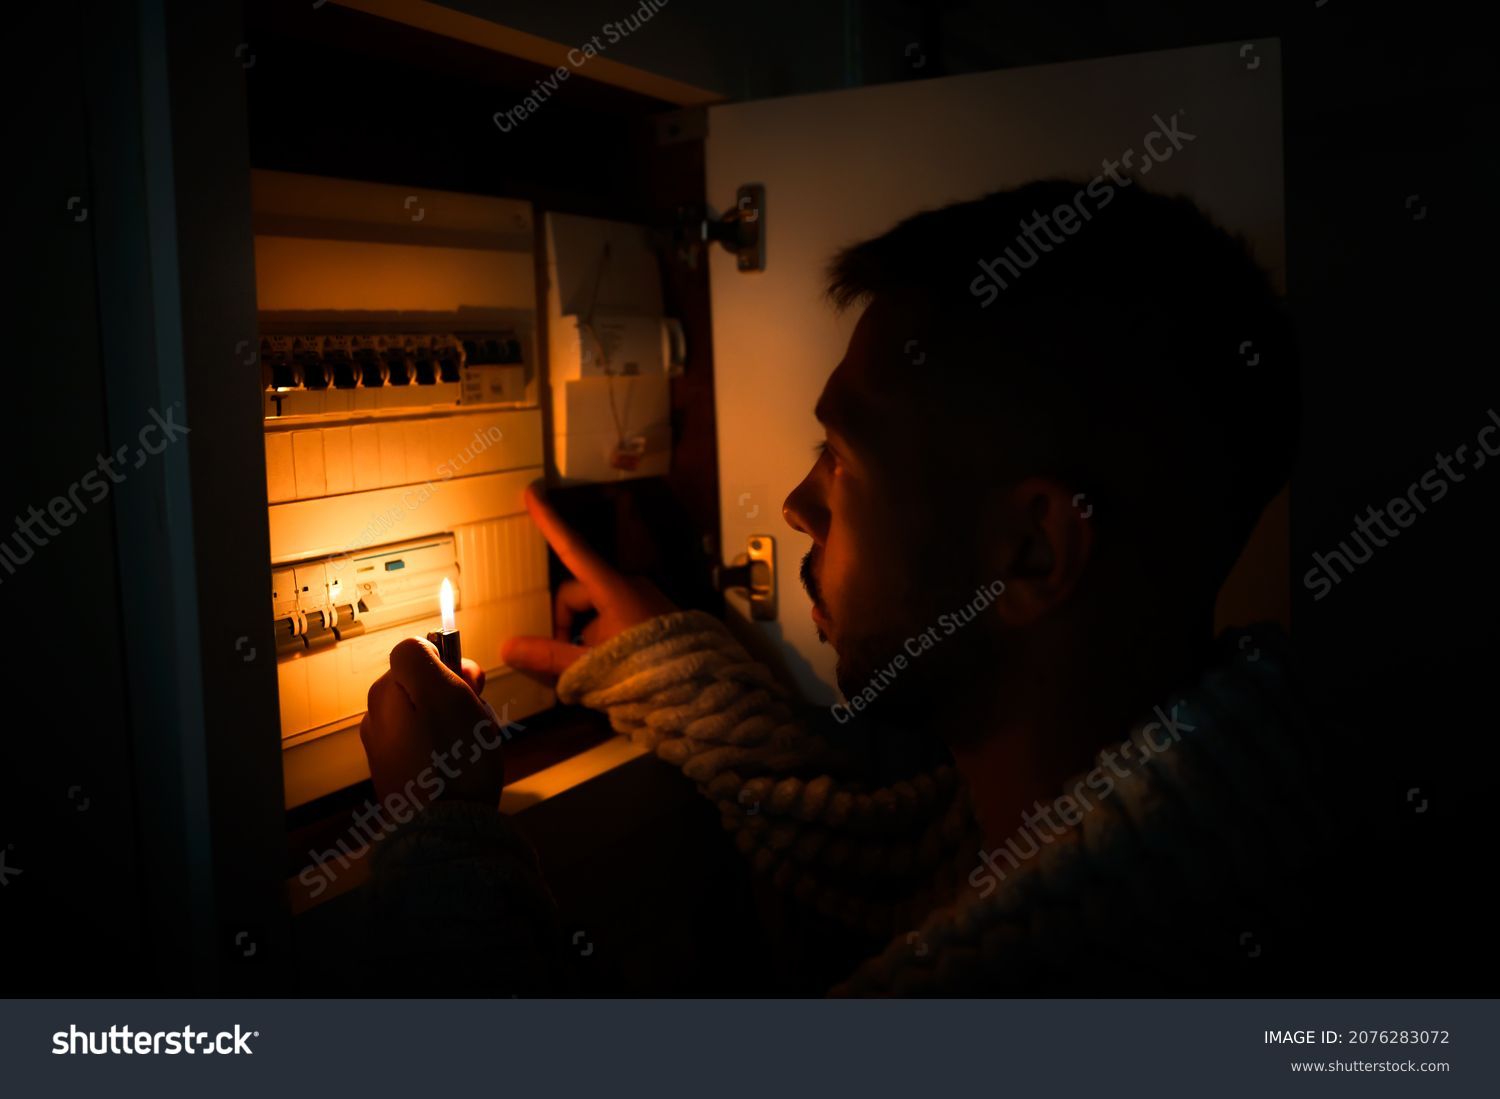 Man with lighter in total darkness investigating fuse box or electric switchboard at home during power outage. Blackout, no electricity concept #2076283072